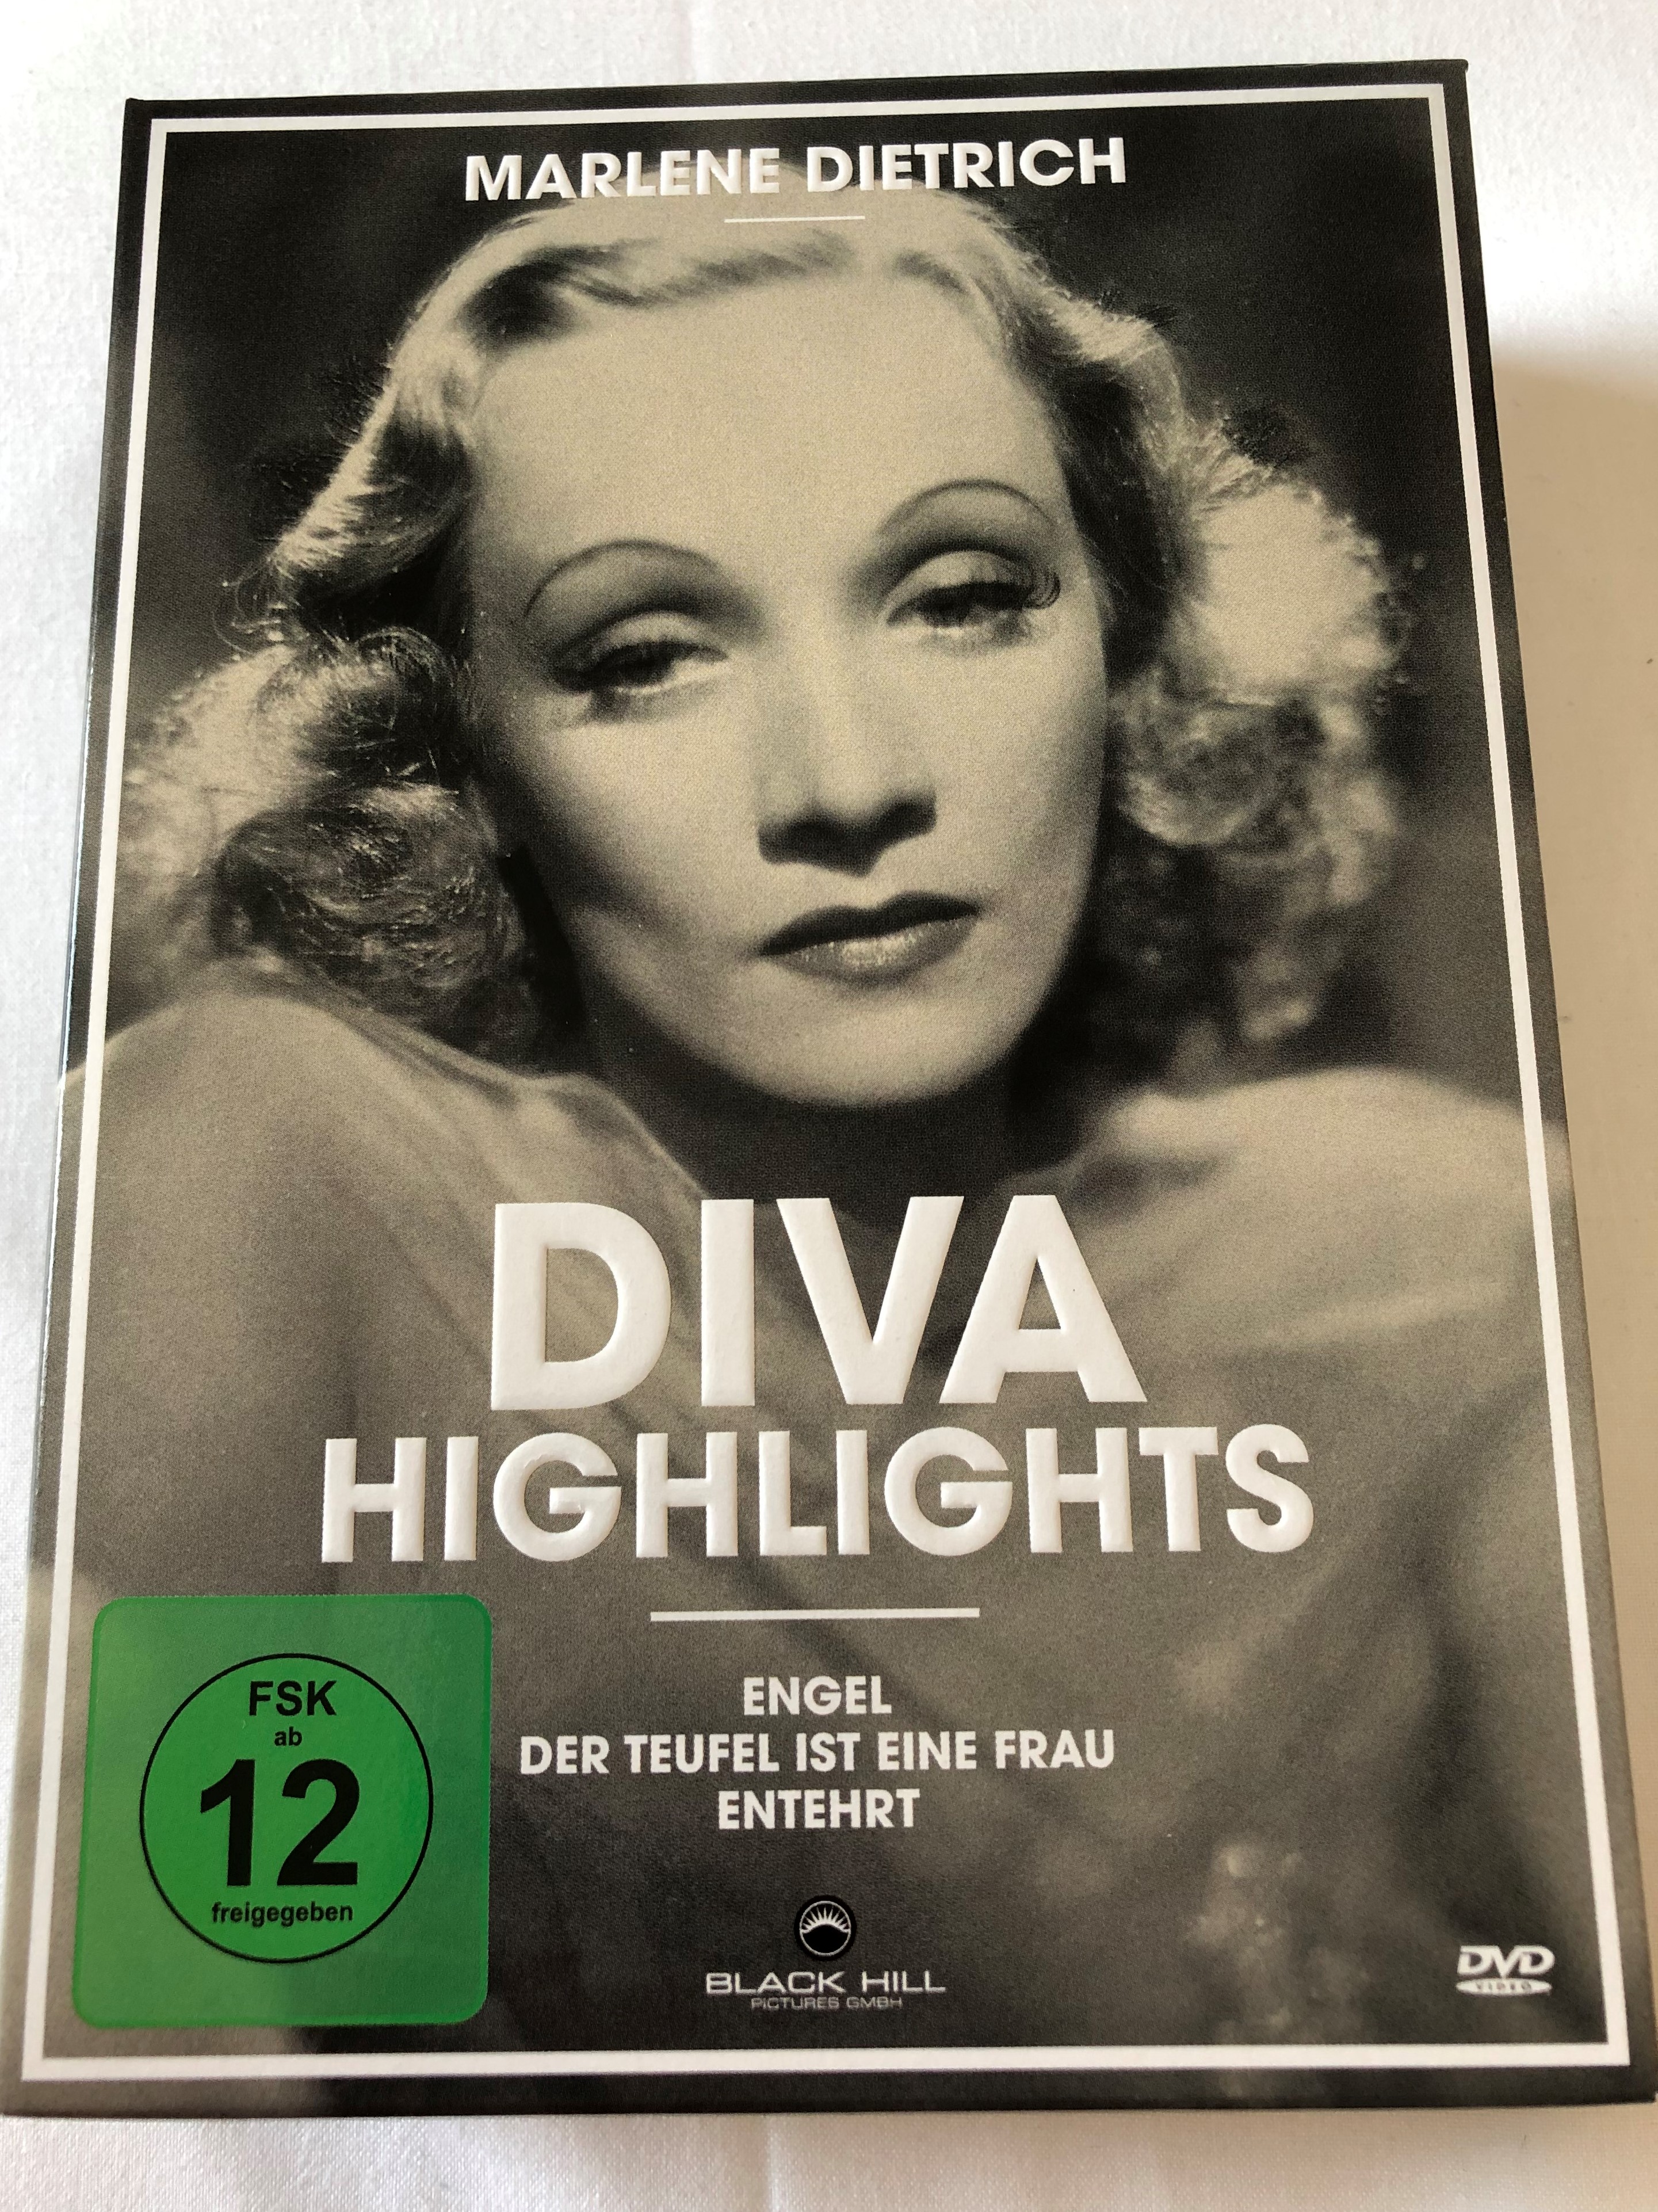 marlene-dietrich-diva-highlights-dvd-set-3-highlights-black-white-classics-with-marlene-dietrich-the-film-diva-angel-the-devil-is-a-woman-dishonored-digital-remastered-3-discs.jpg